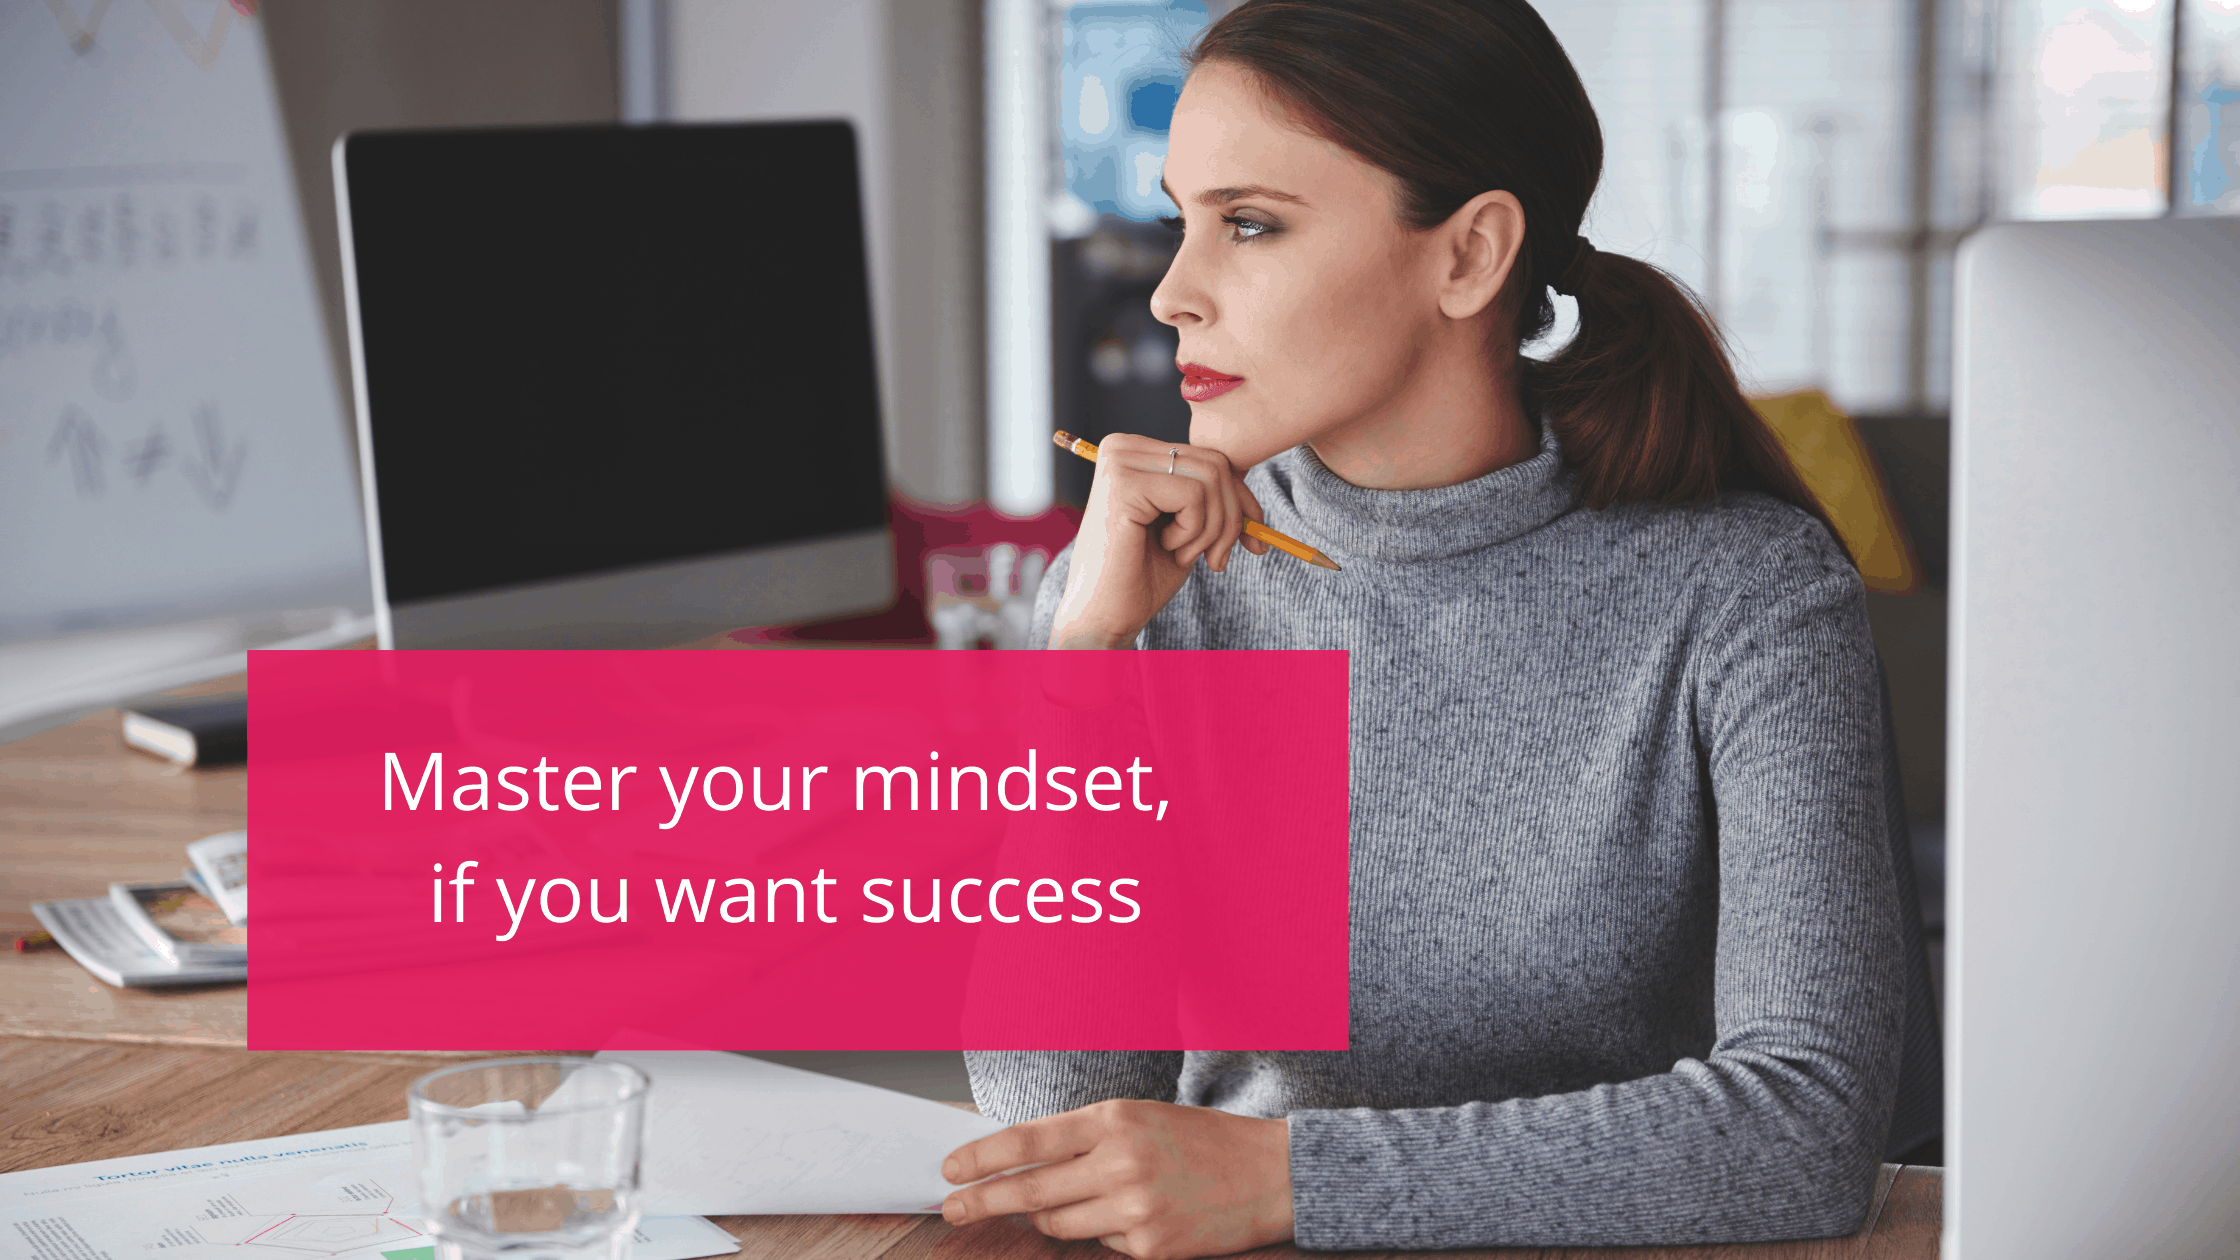 Master your mindset, if you want success